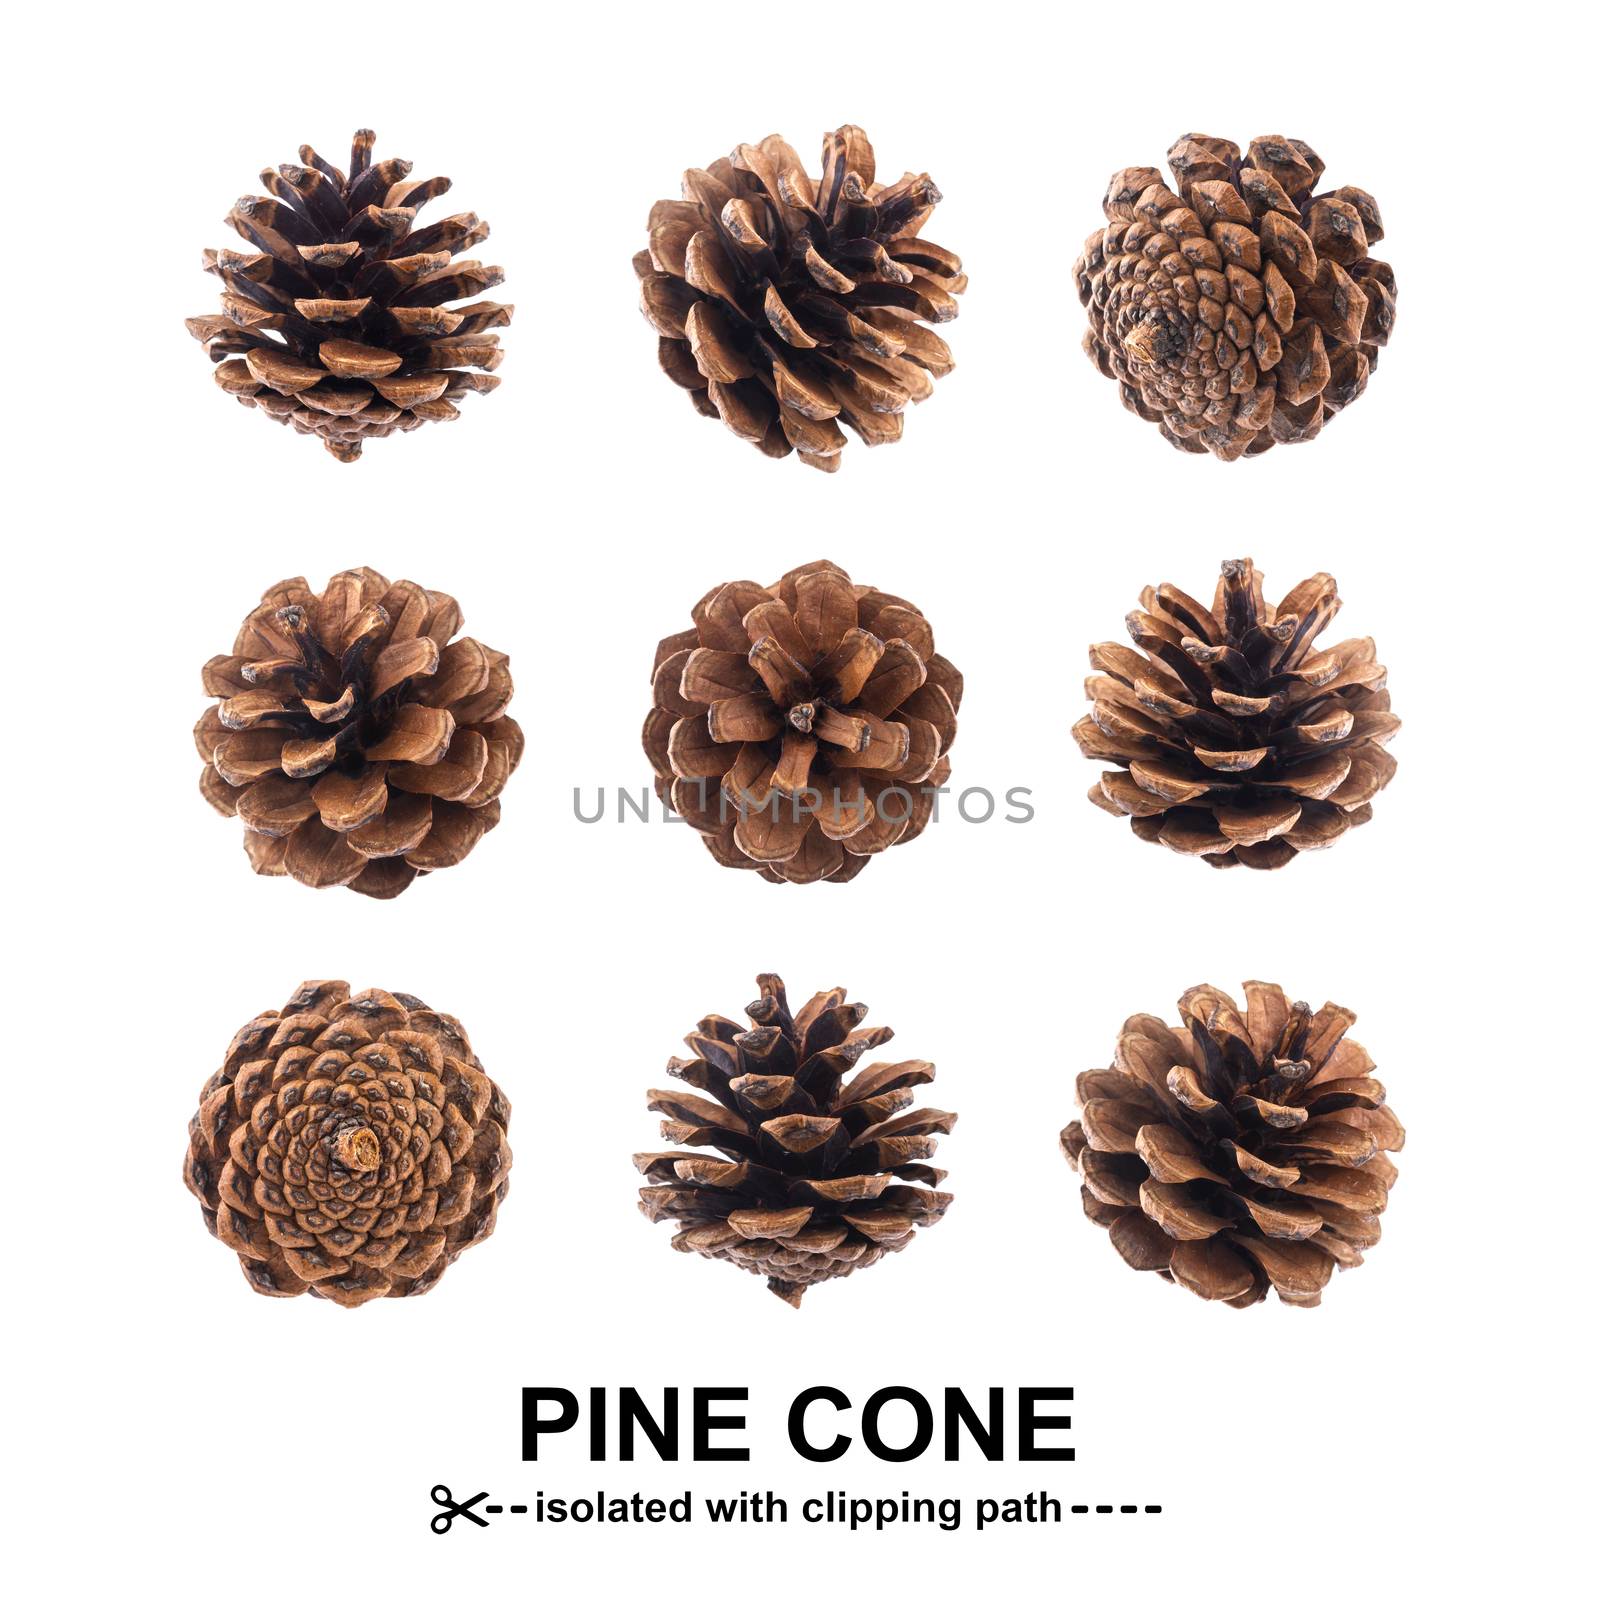 Pinecones. Fir cones isolated on white background with clipping path by xamtiw